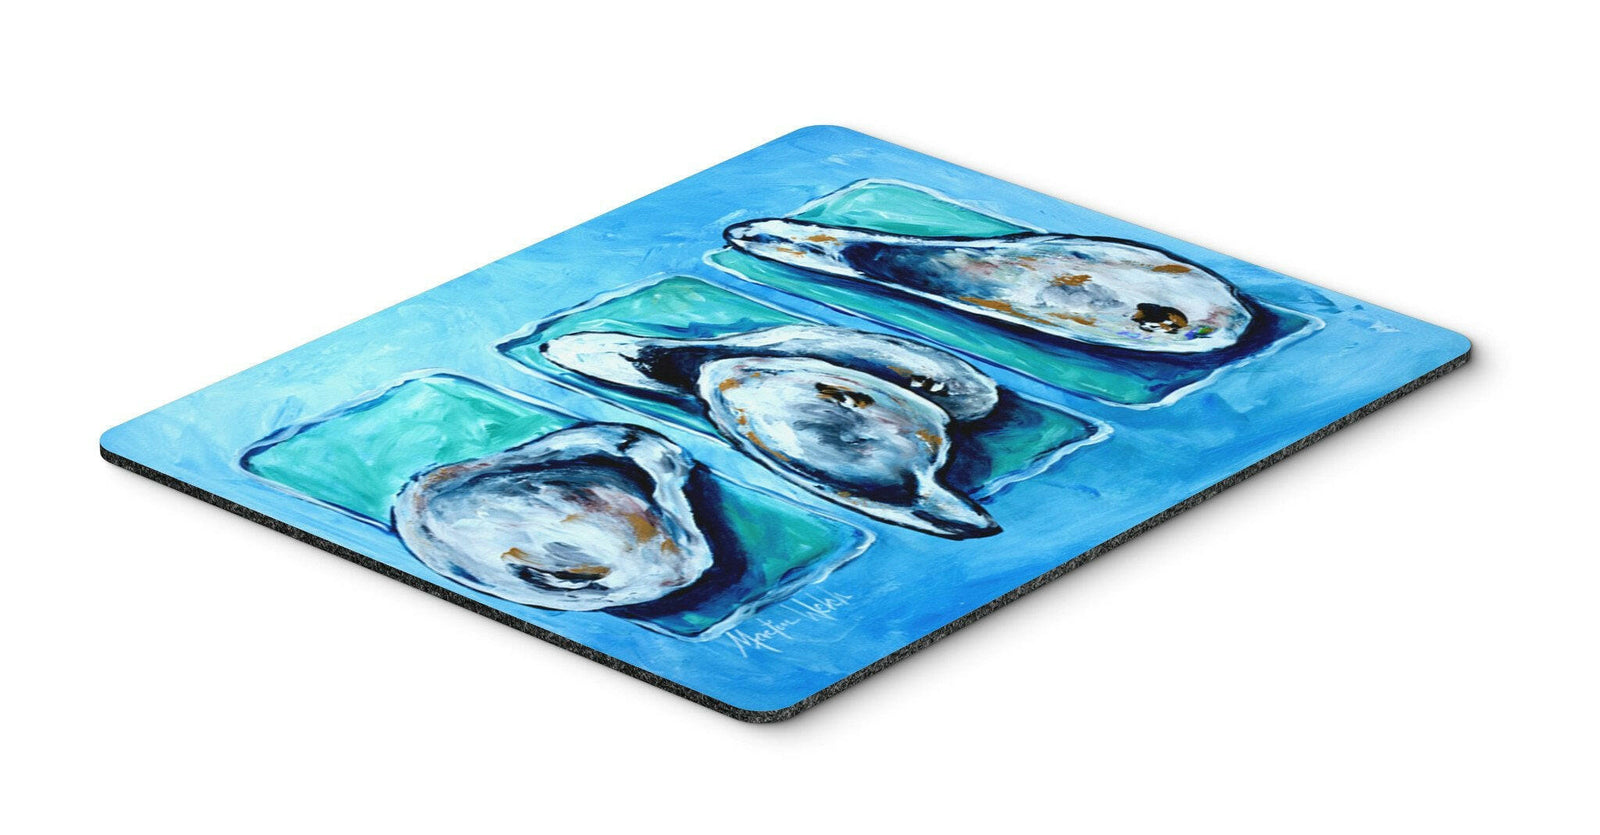 Oysters Oyster + Oyster = Oysters Mouse Pad, Hot Pad or Trivet by Caroline's Treasures